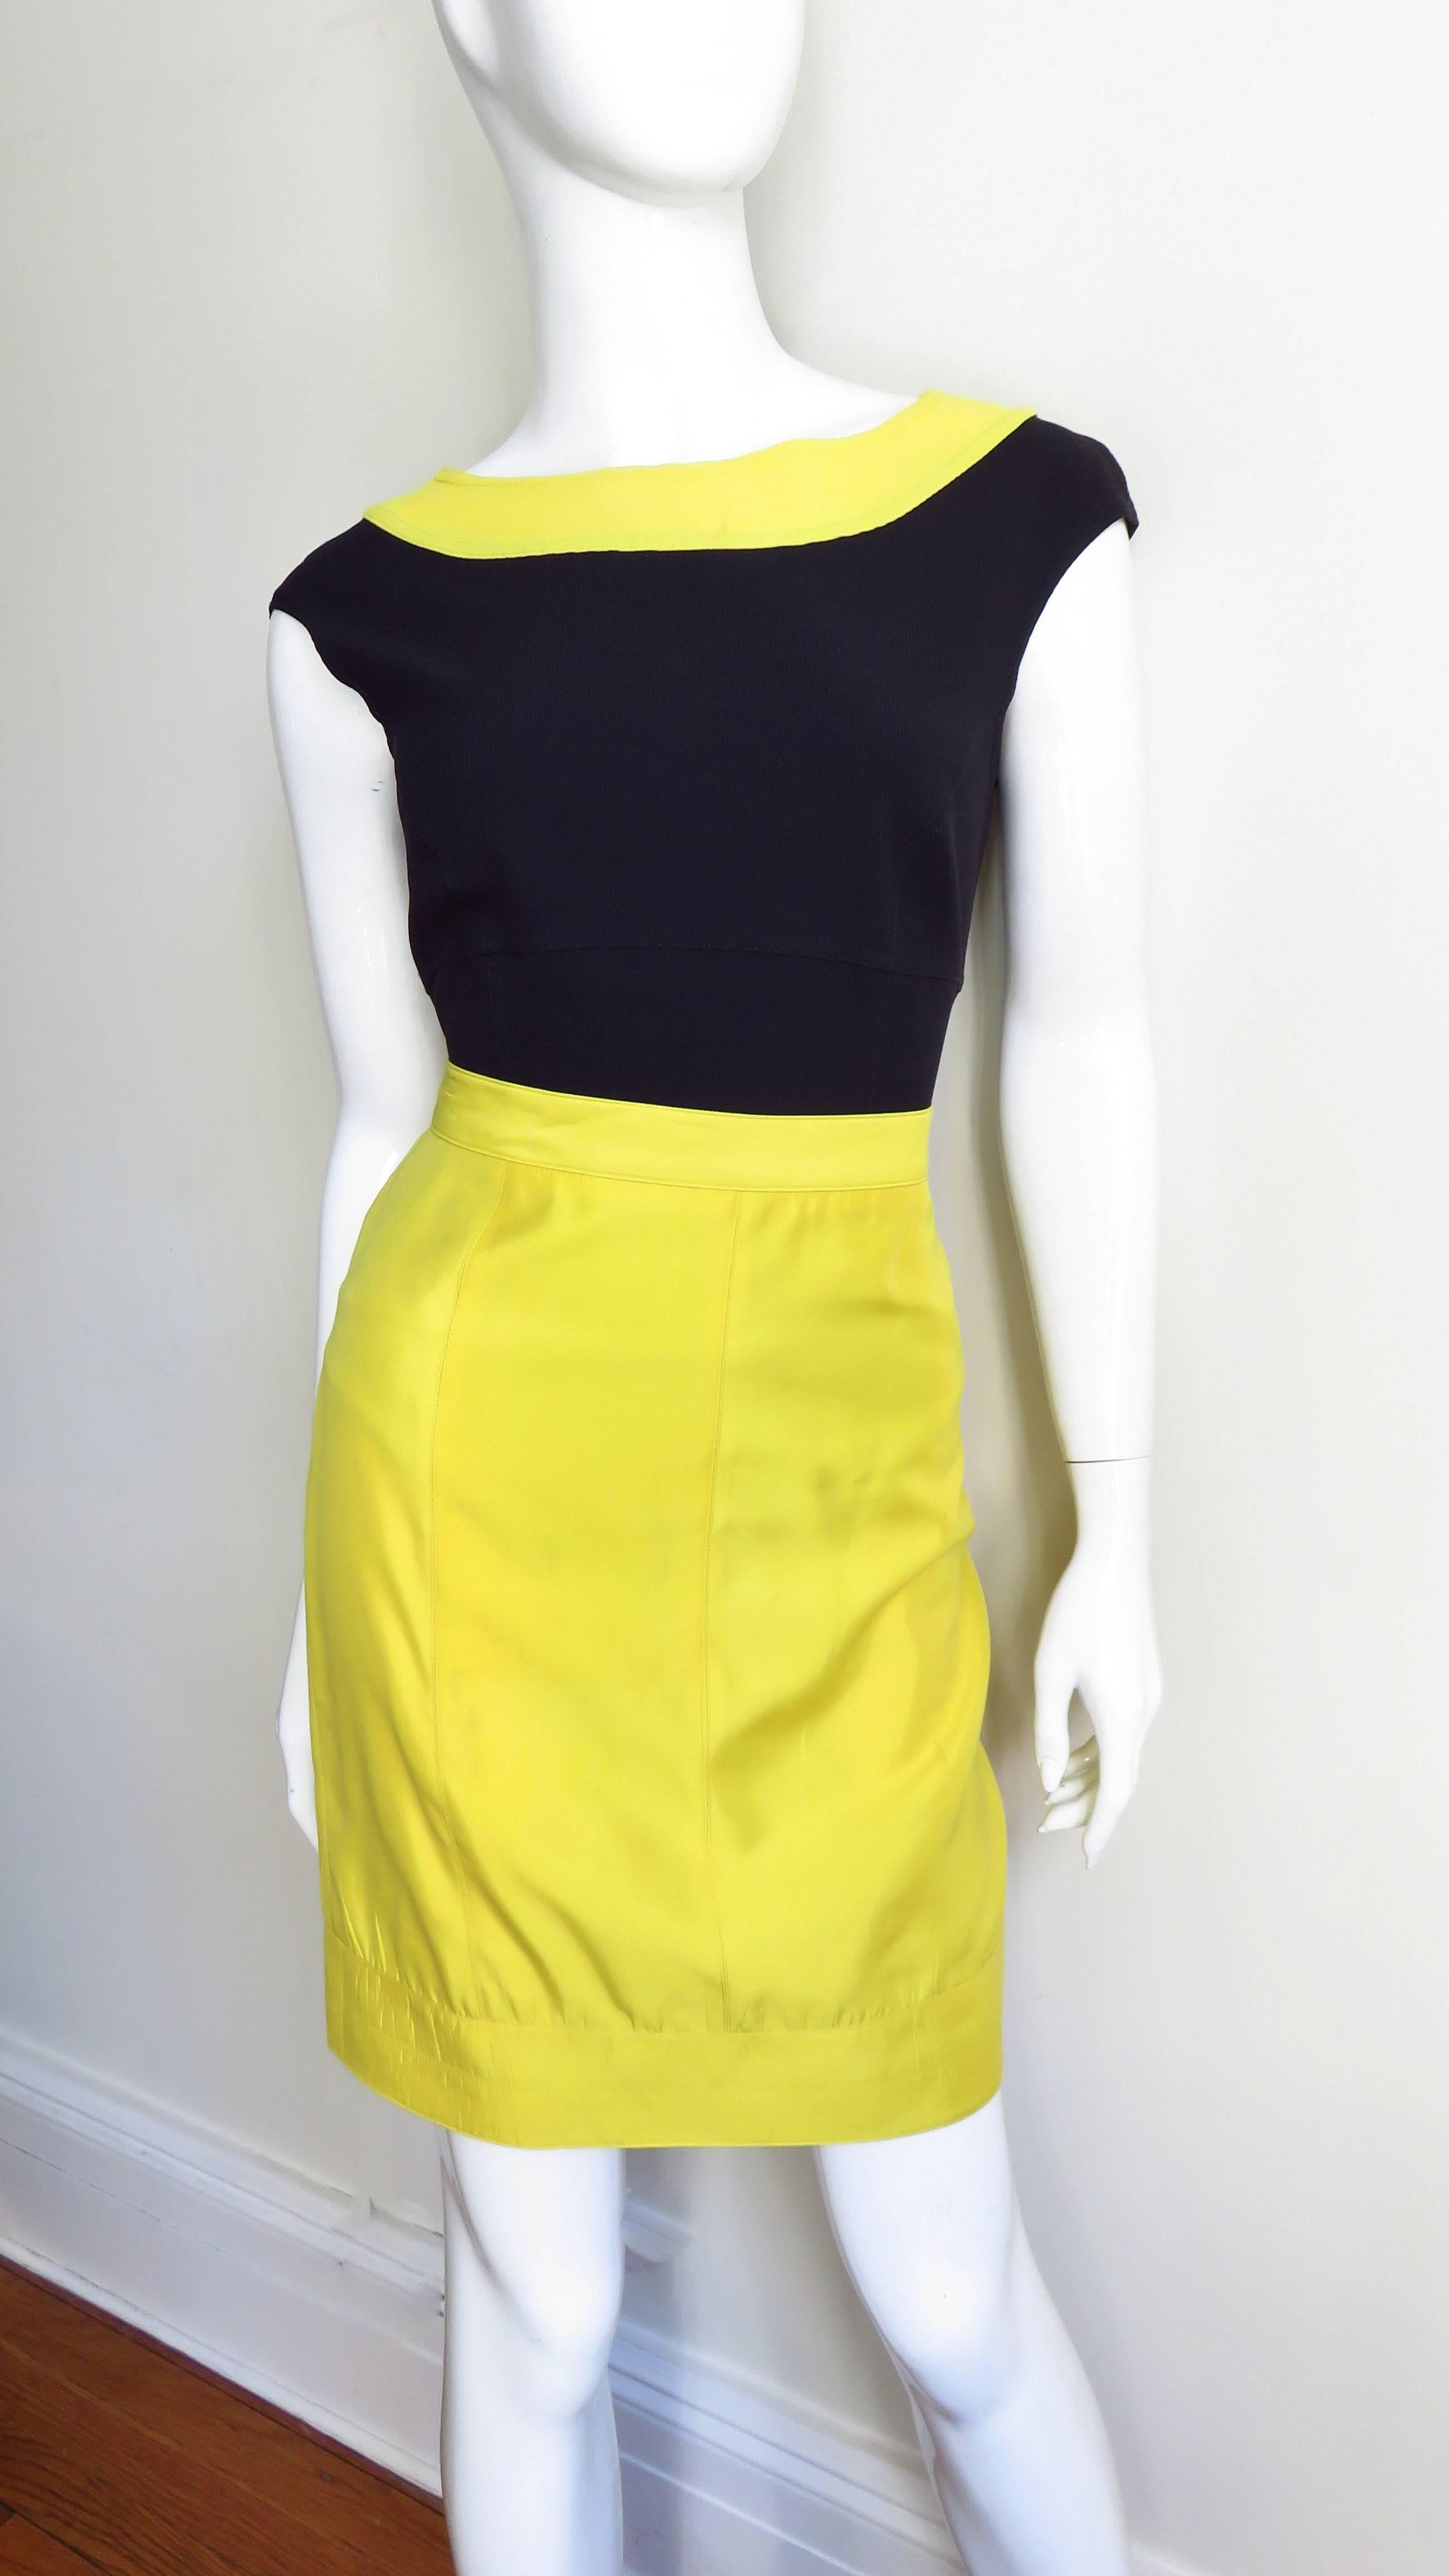 A fabulous silk/cotton blend set from Claude Montana in yellow and black. The 3 piece set consists of a yellow pencil skirt, a full black button front mid calf length skirt and a yellow trimmed black jersey sleeveless bodysuit with a bateau